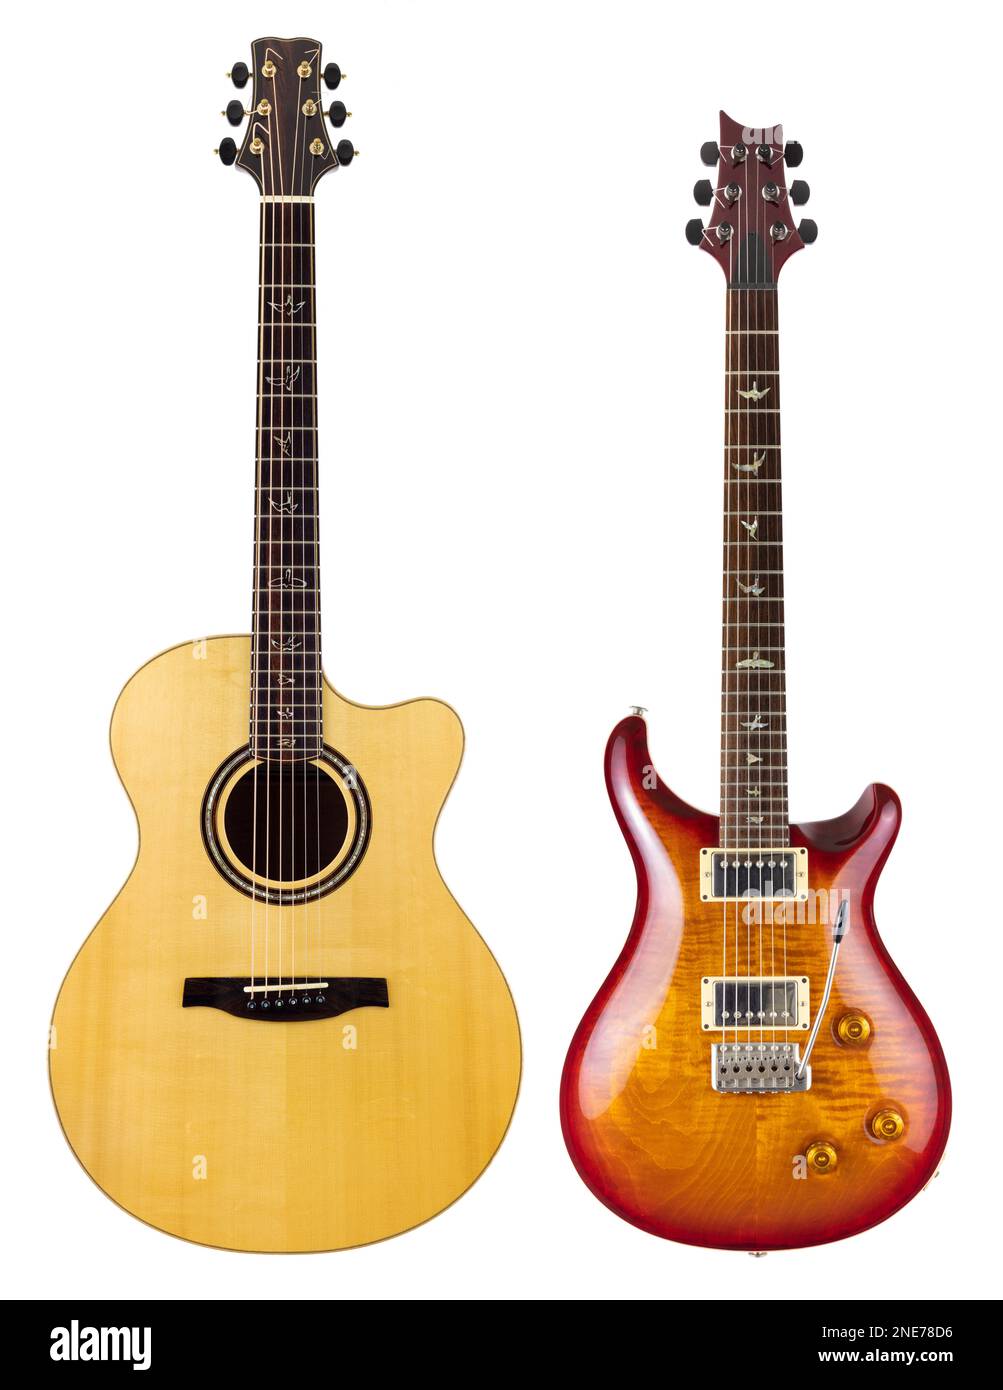 Guitars Two guitars Electric Guitar Acoustic Guitars cut out Guitars on white background PRS custom 22 guitar PRS Angelus acoustic guitar Two guitars Stock Photo